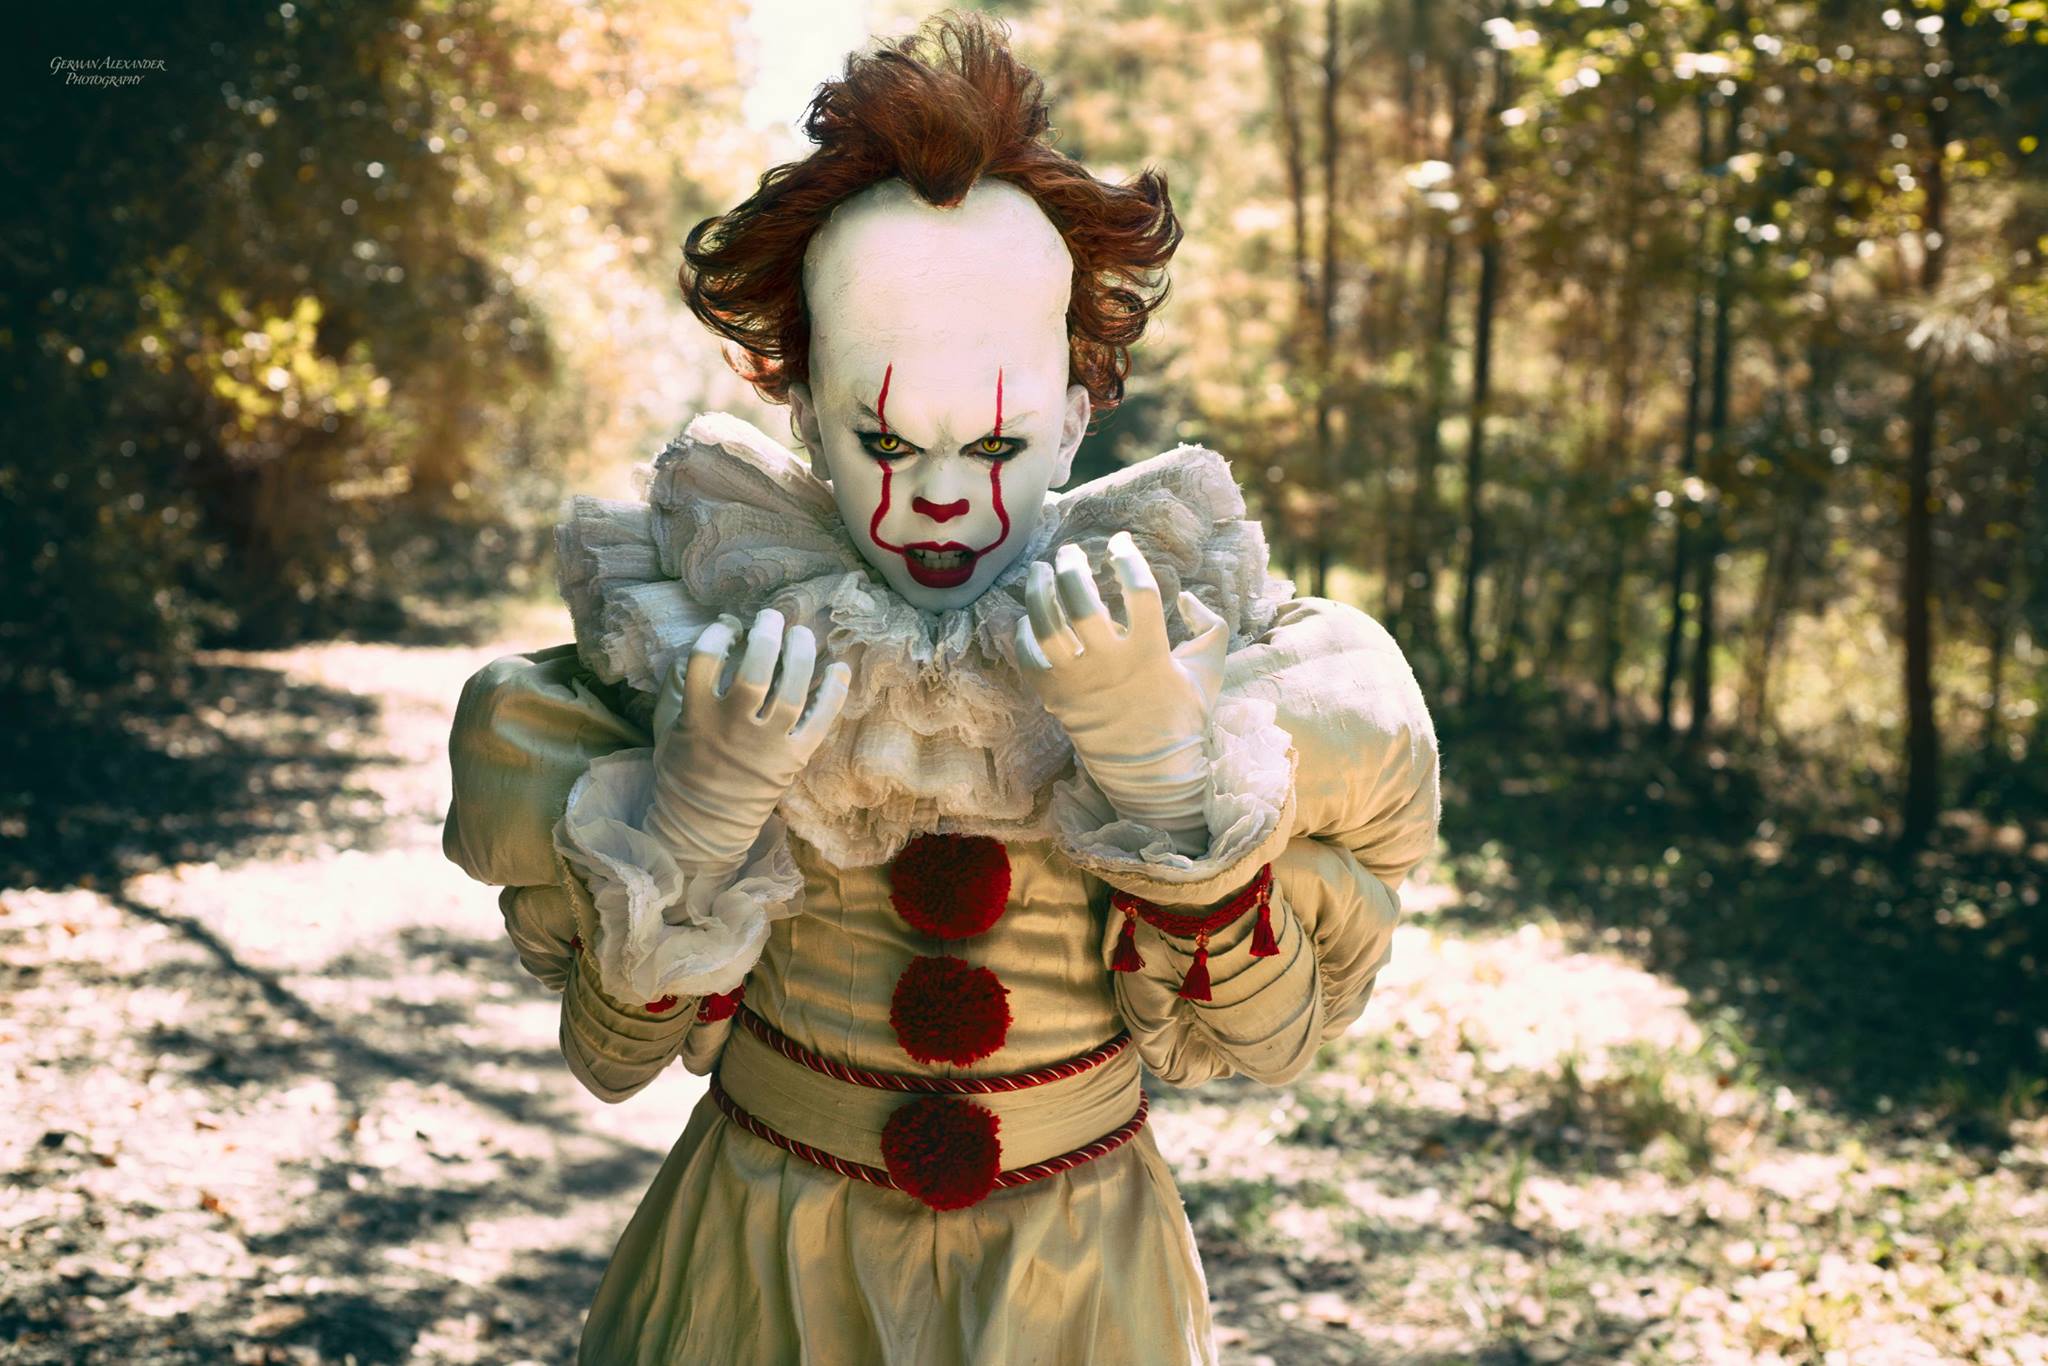 Houston's reigning cosplay prince dresses as Pennywise the clown in new